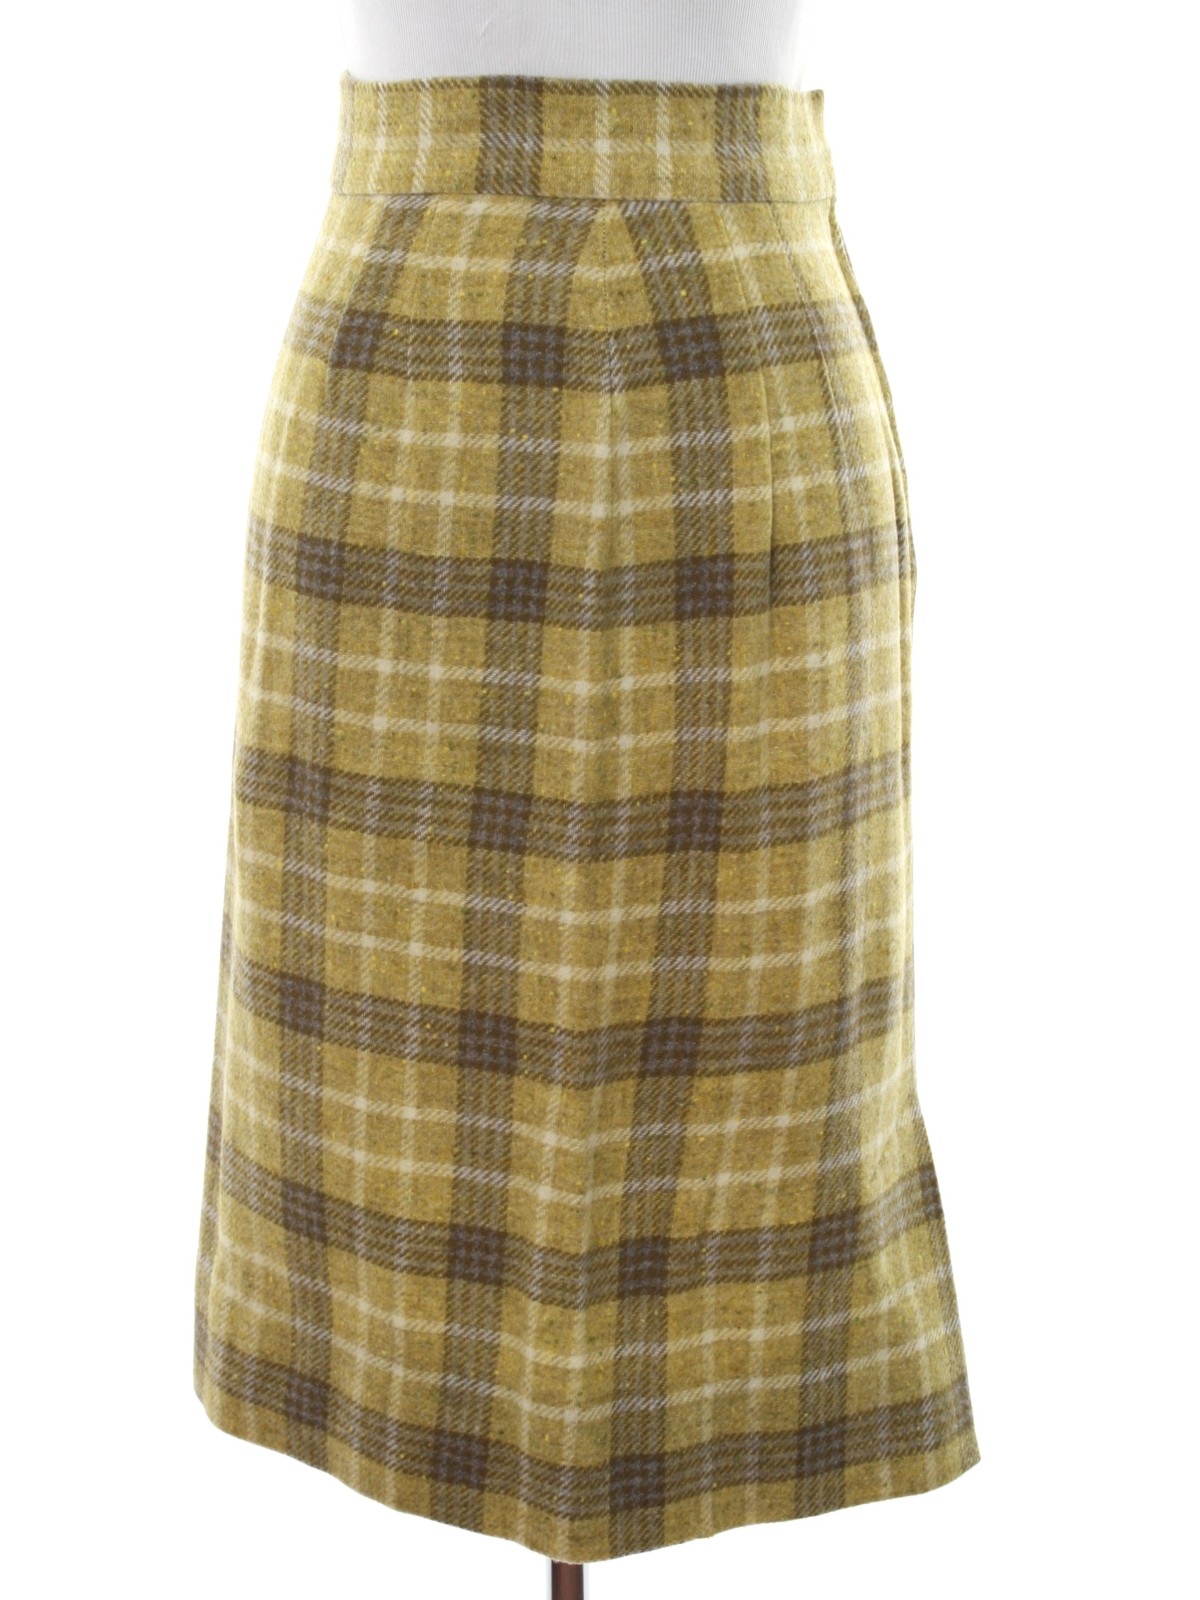 Home Sewn 1960s Vintage Plaid Skirt: 60s -Home Sewn- Womens gold, wool ...